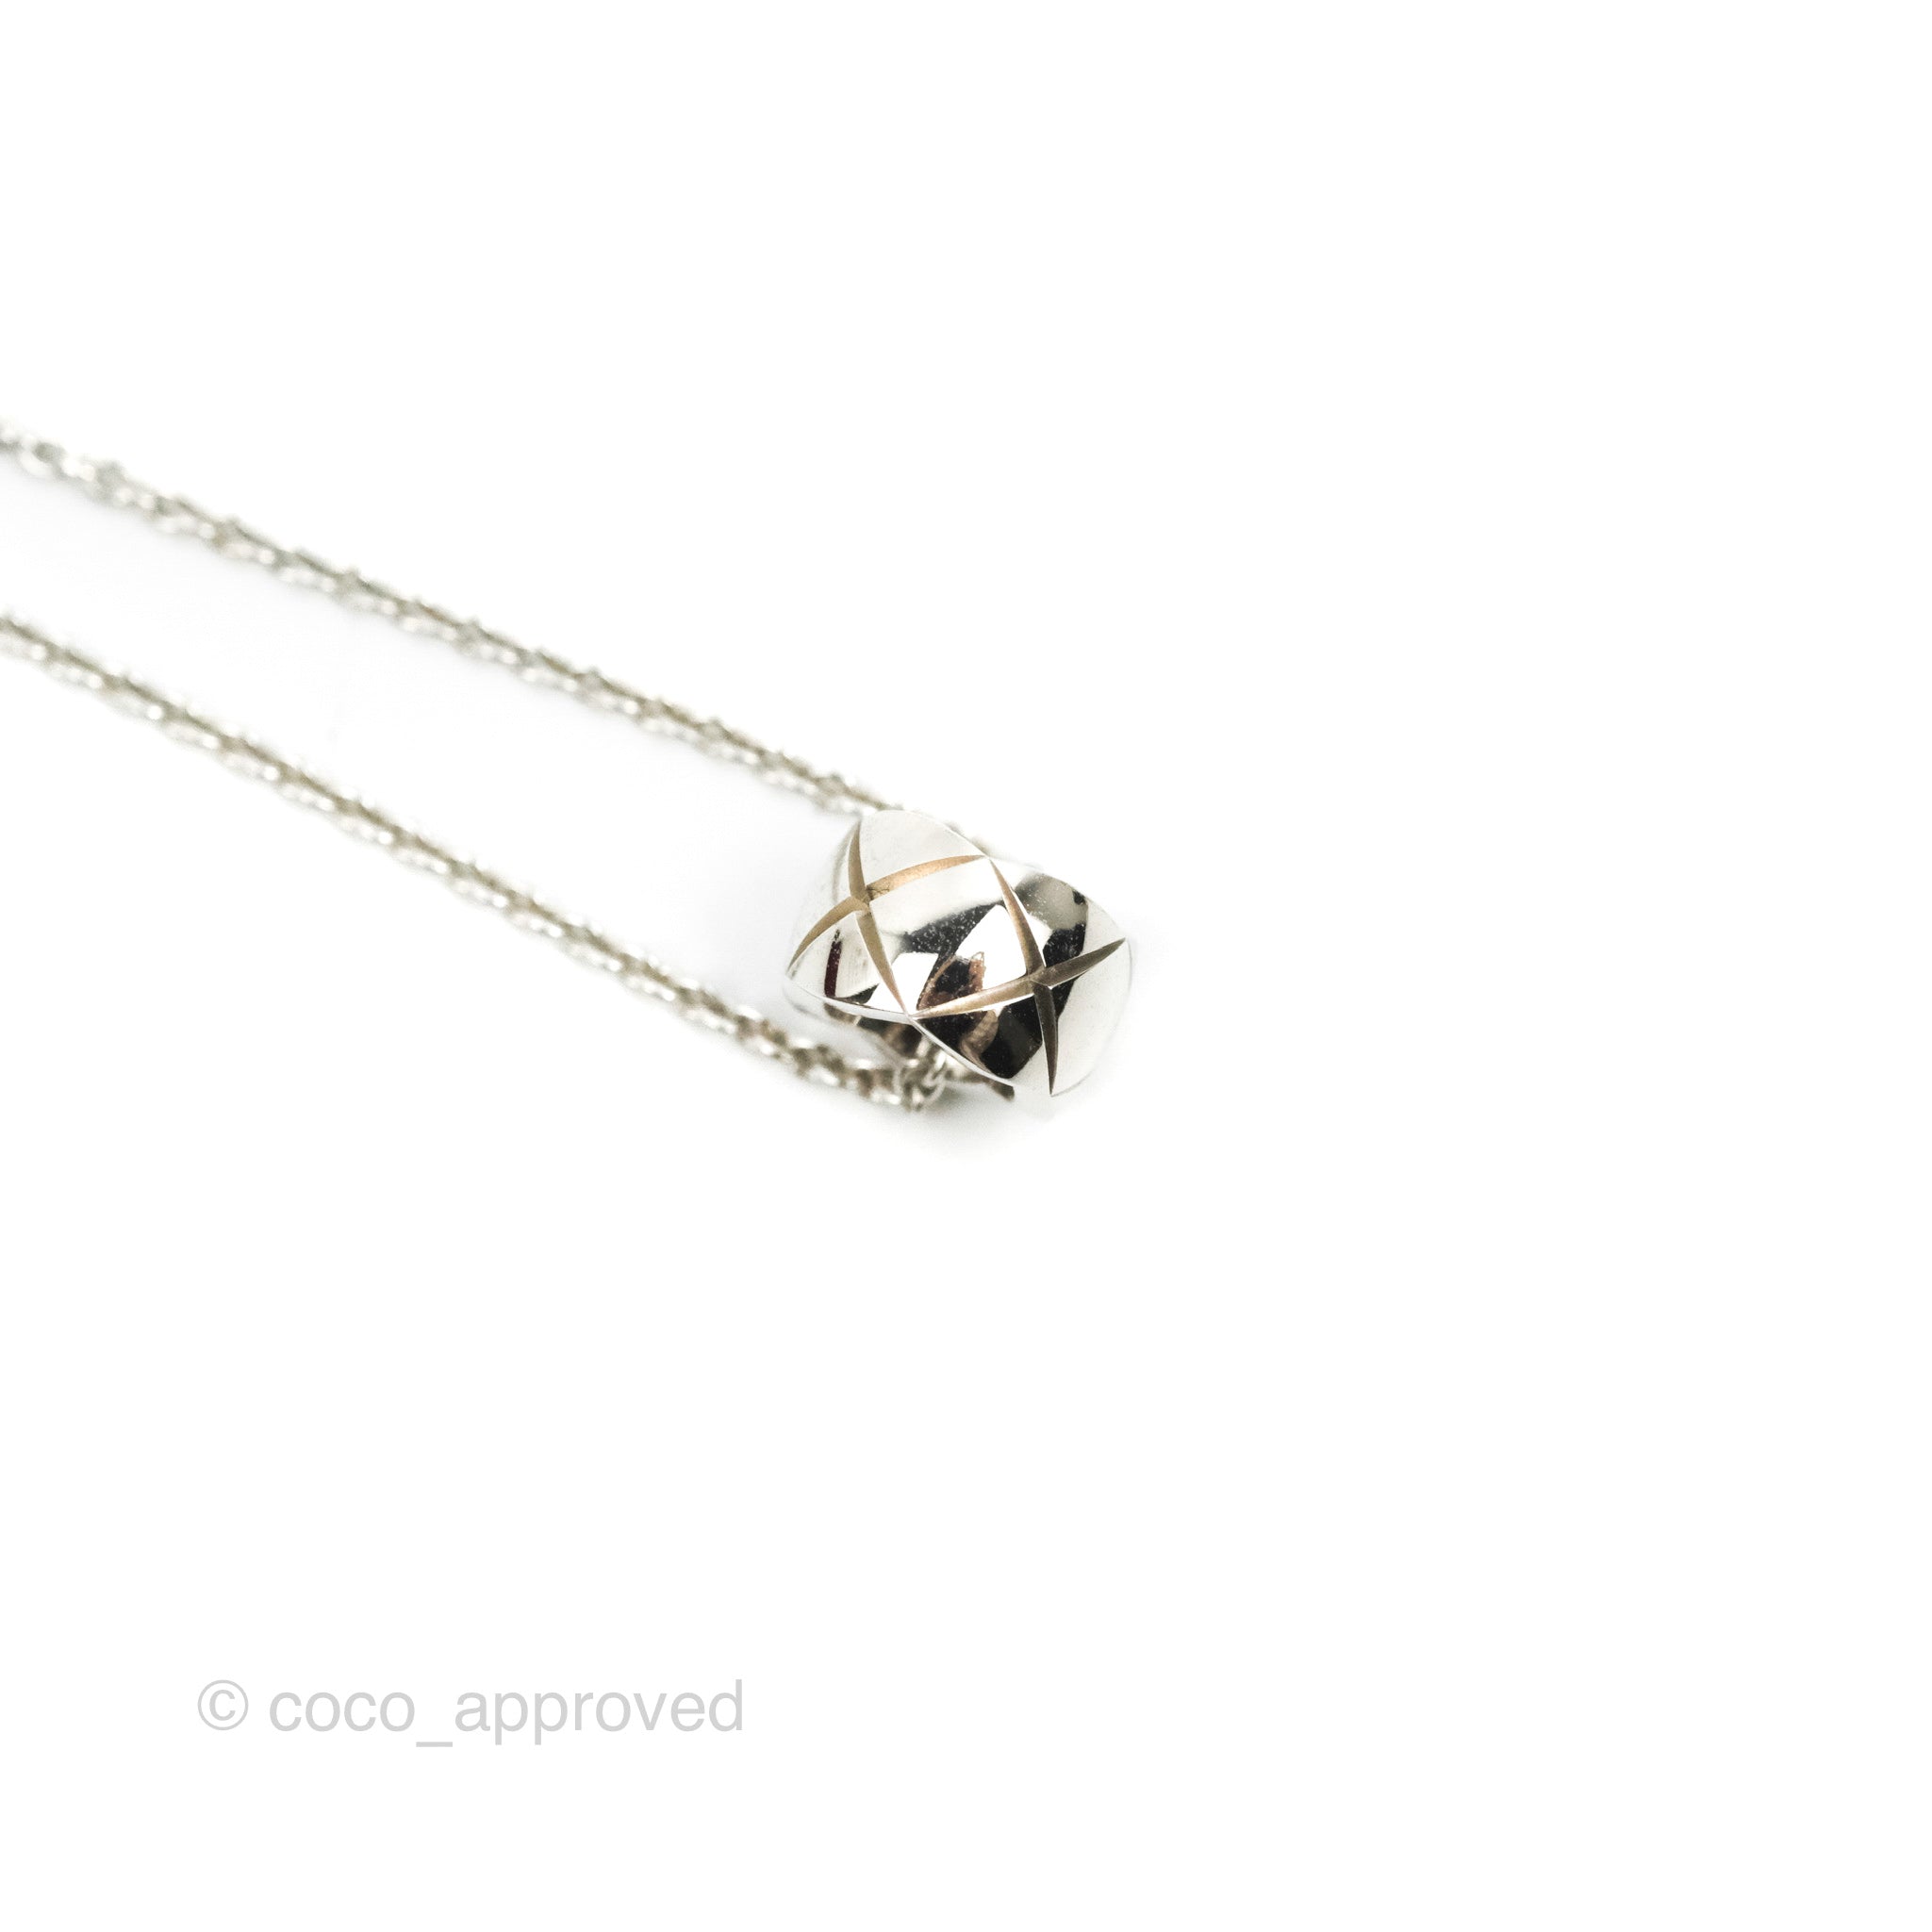 Inspired Chanel Coco Crush Pendant Necklace 18k White Gold with Diamonds